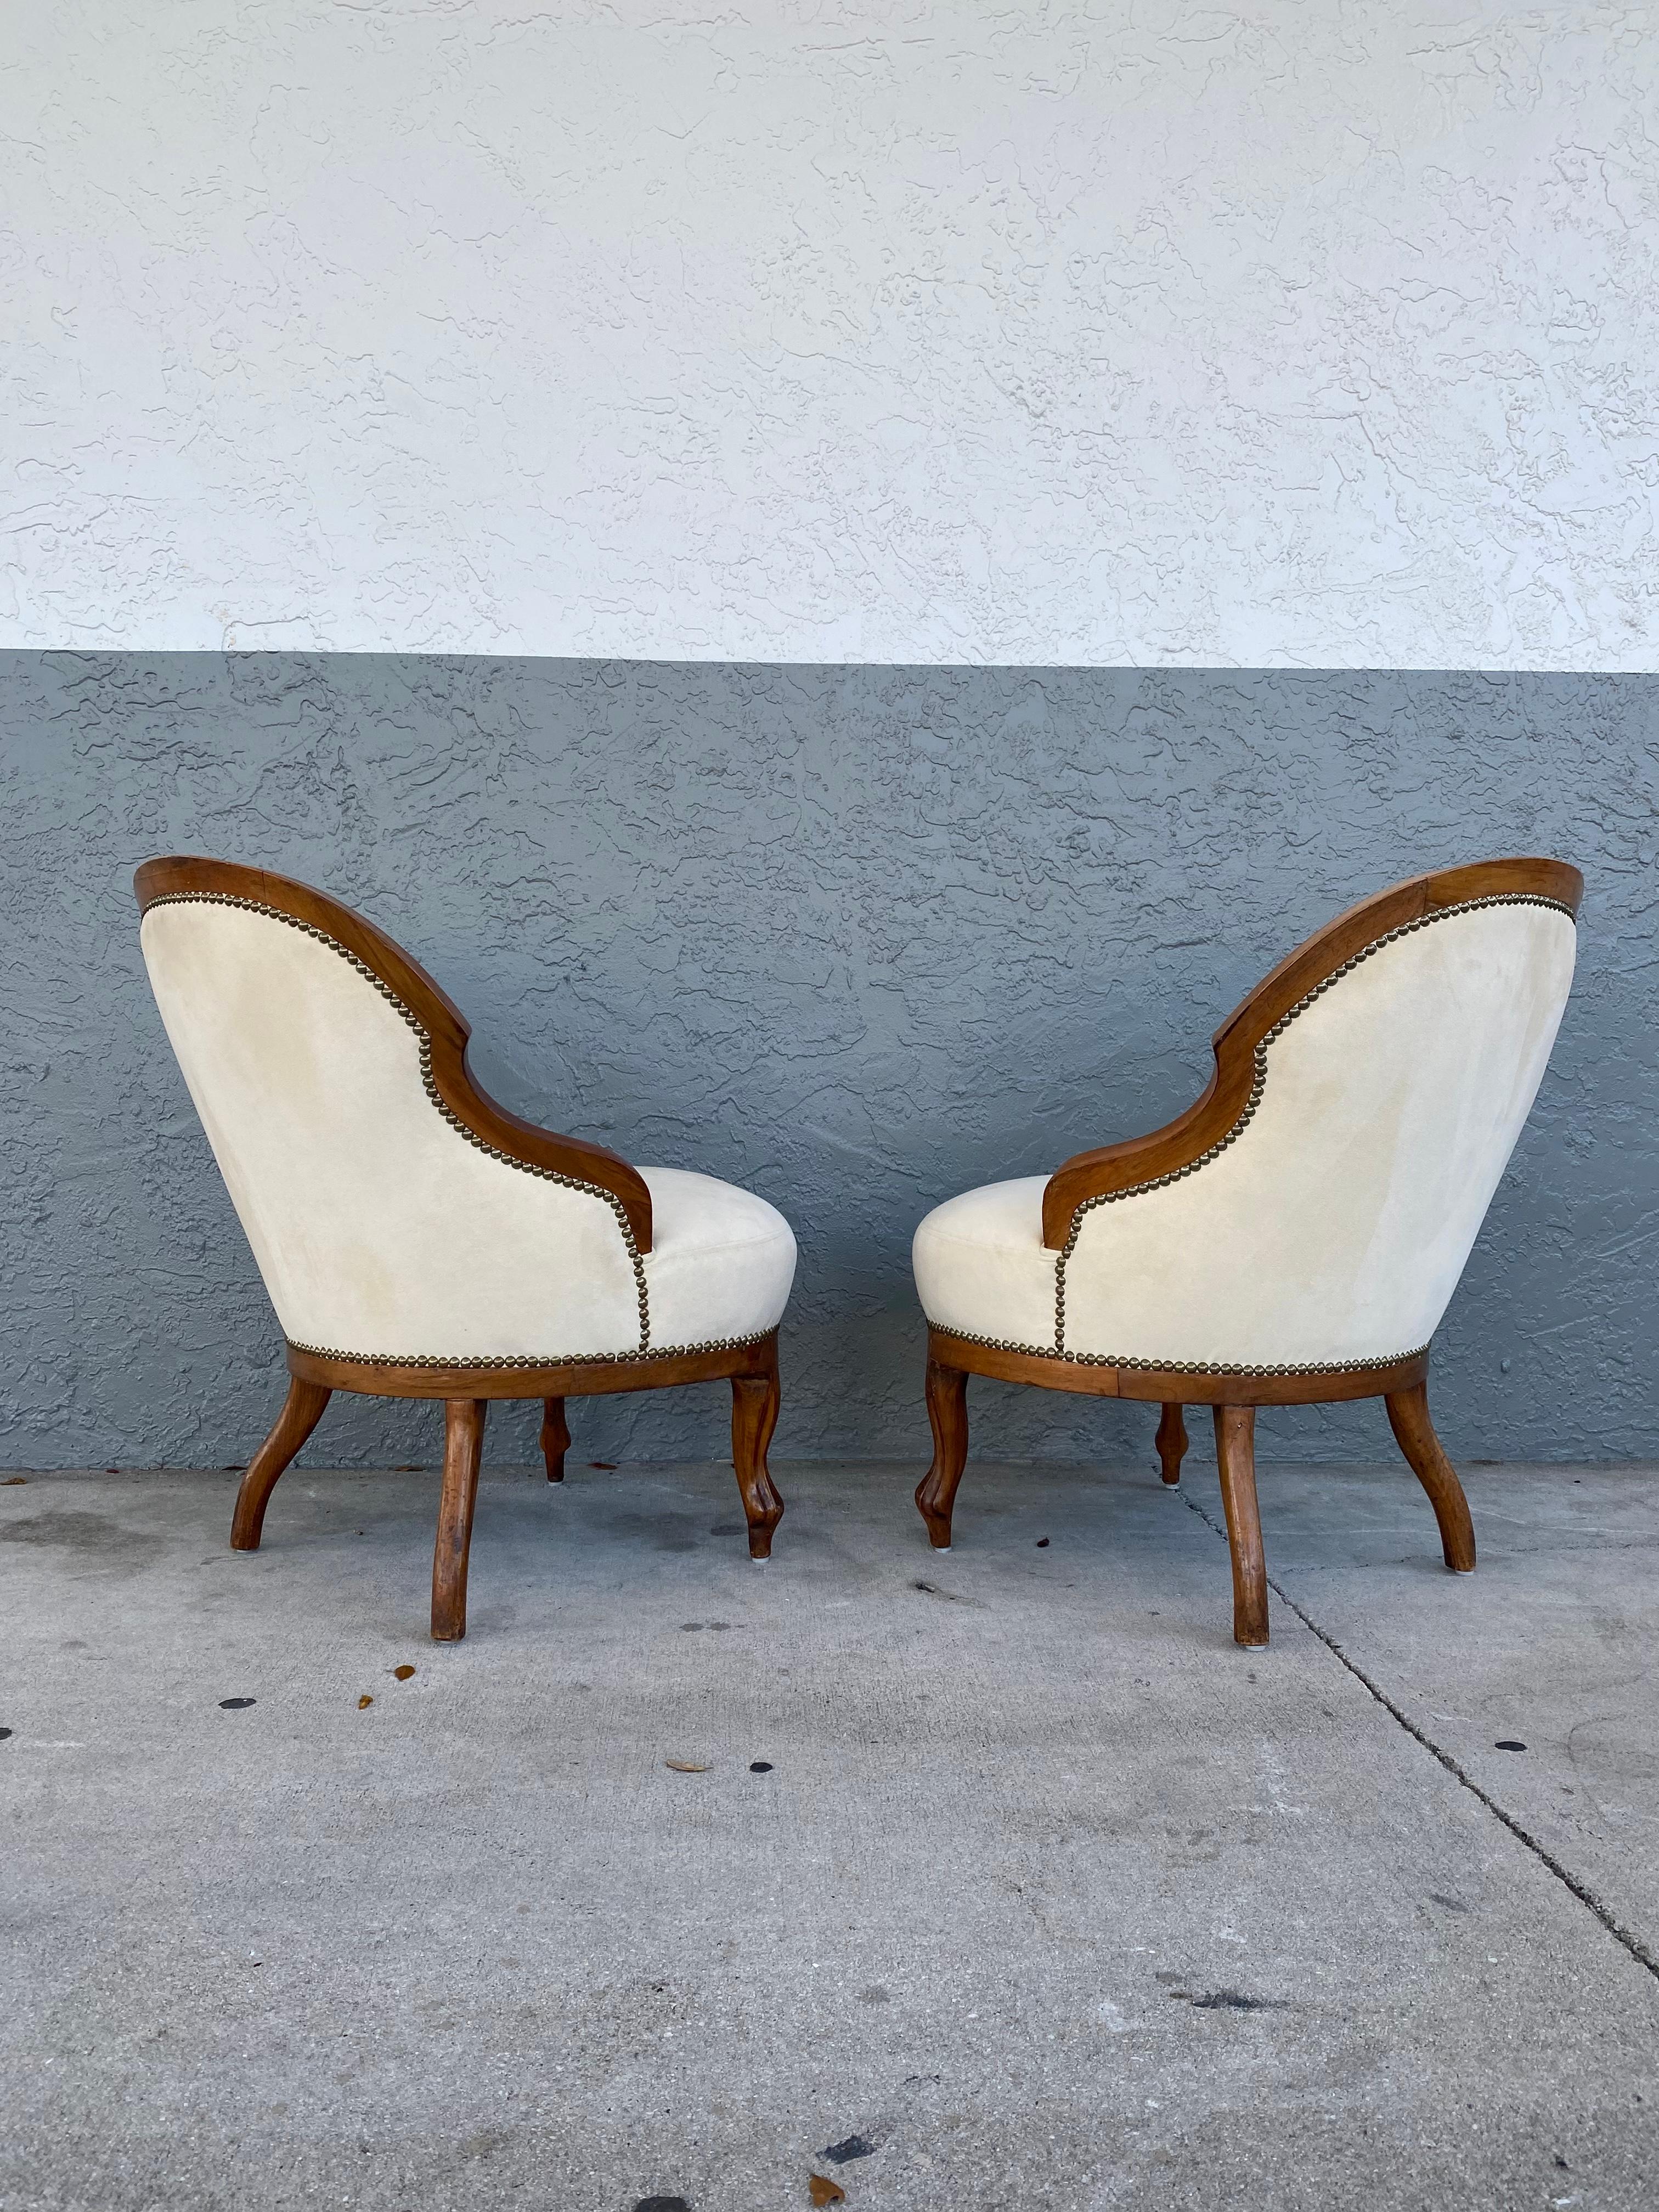 1940s Petite Nailhead Spoon Curved Rounded Slipper Chairs, Set of 2 For Sale 1